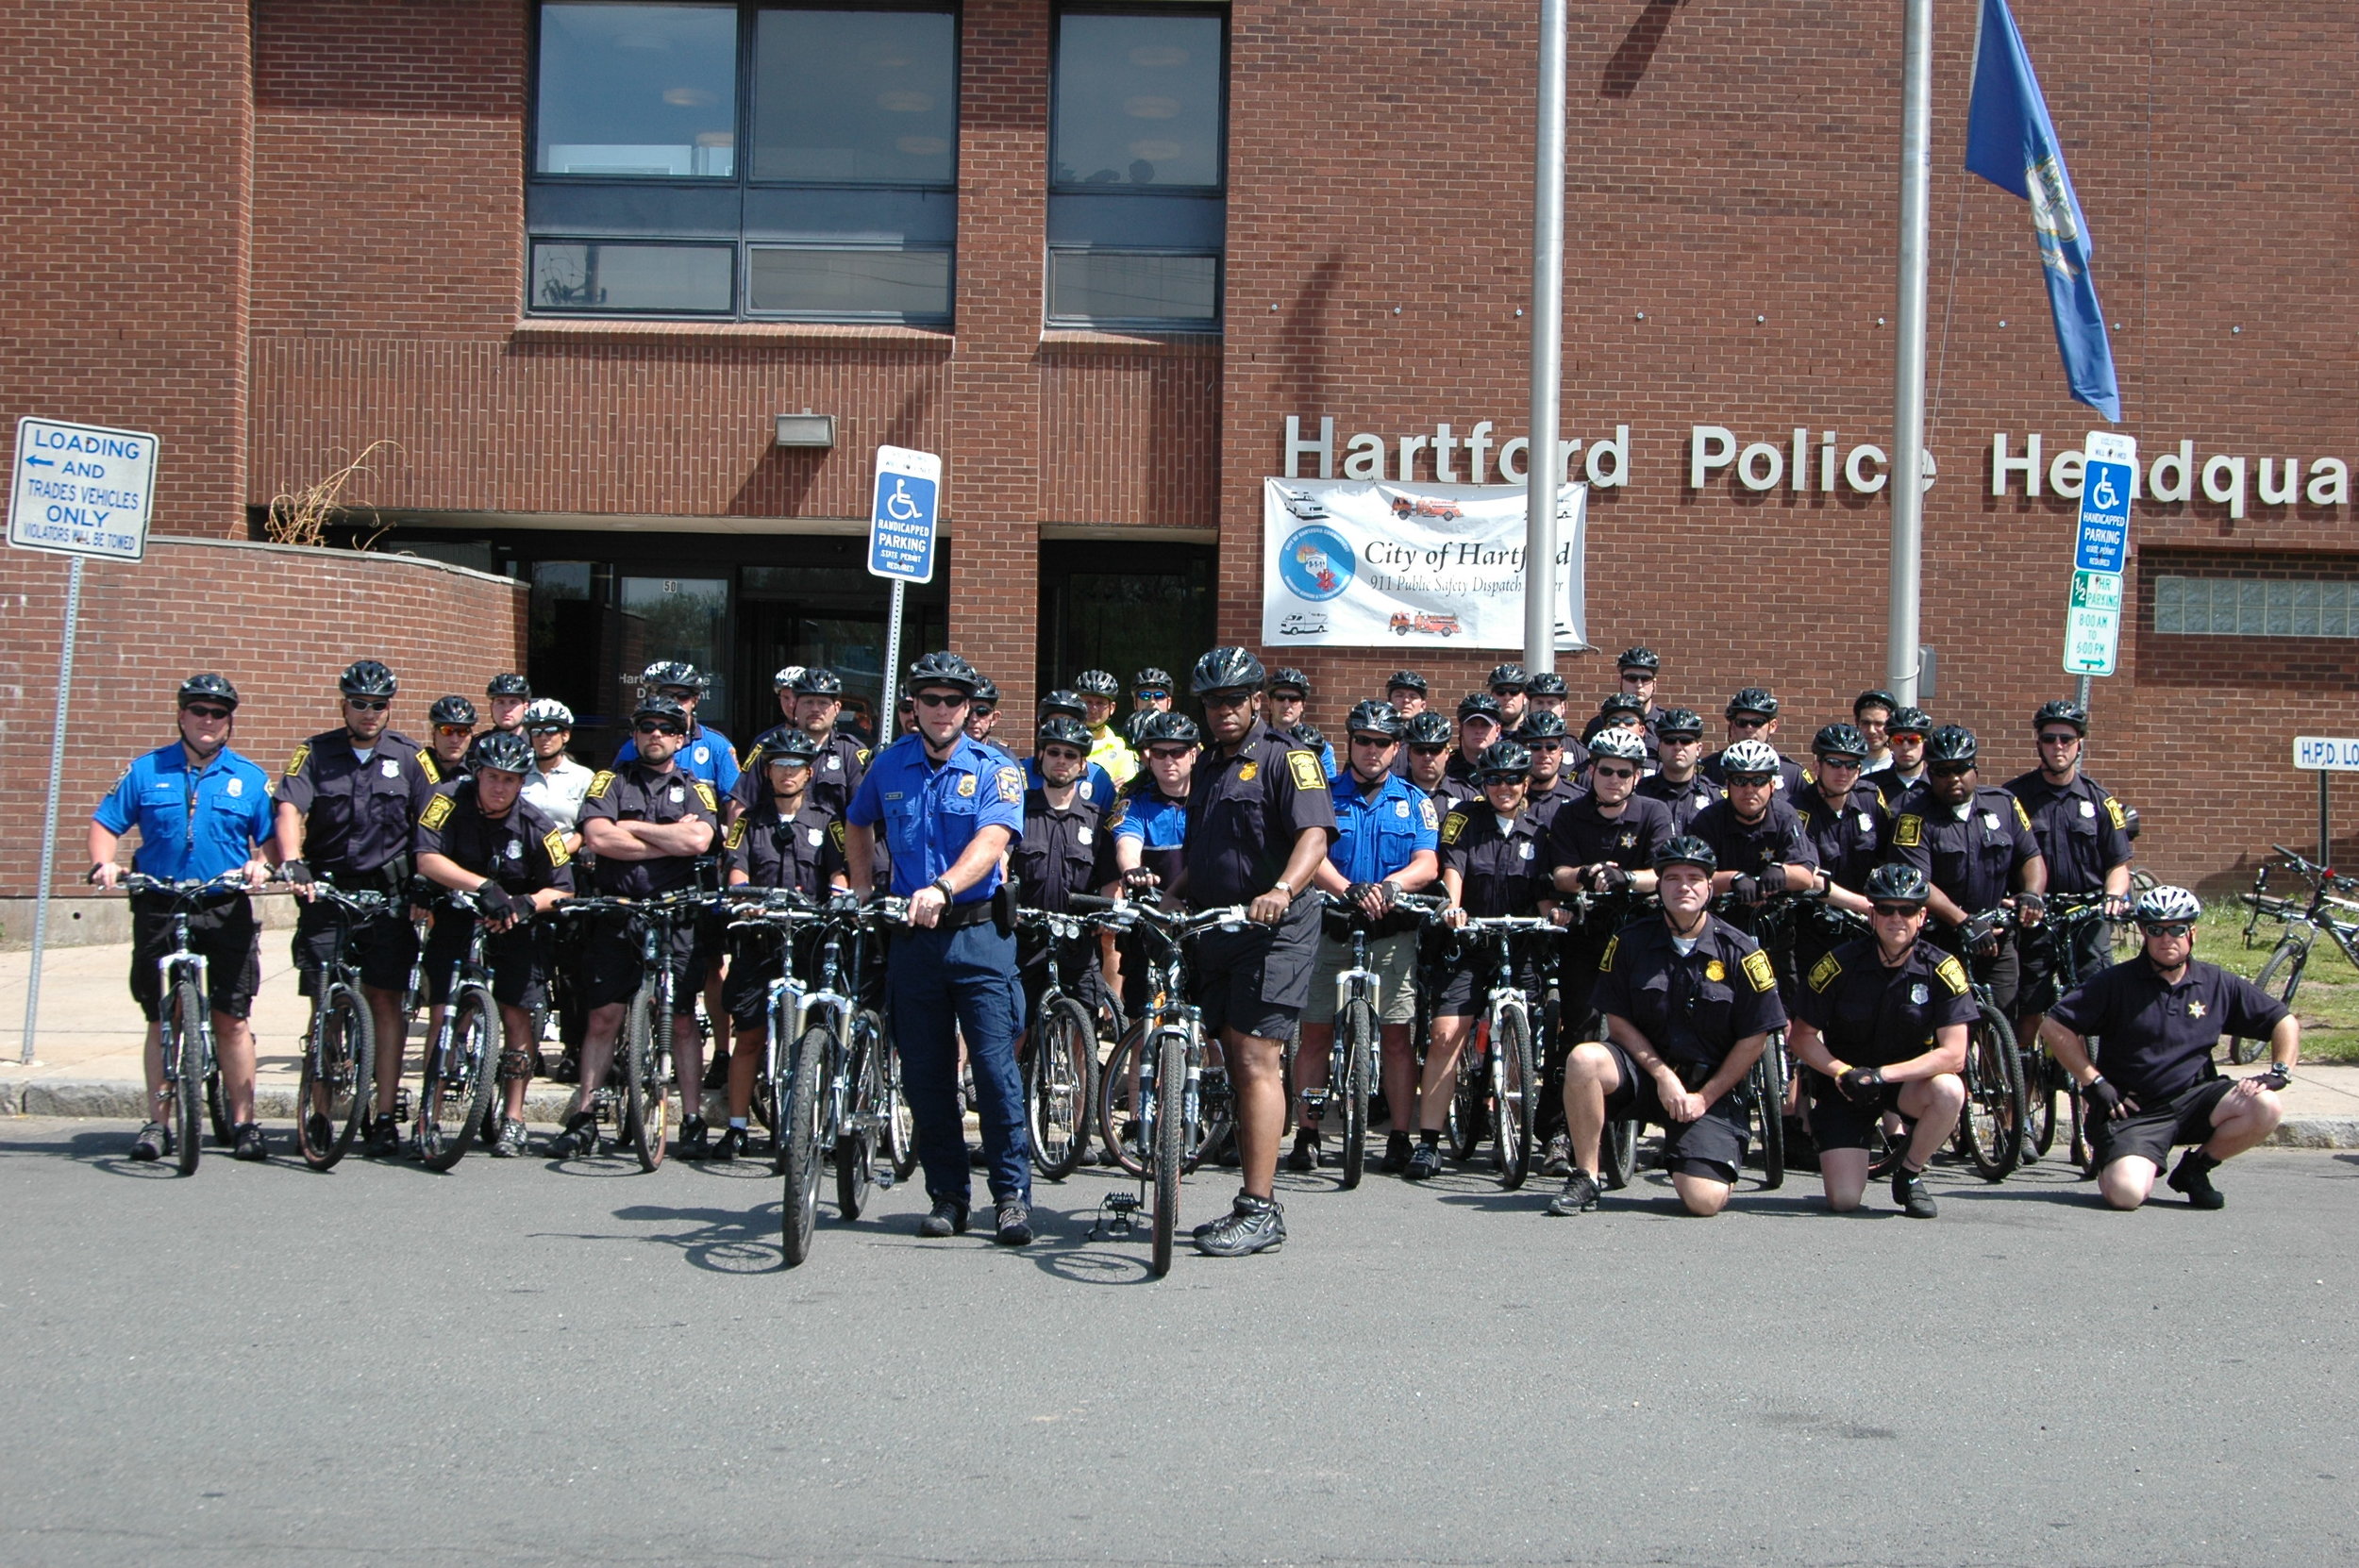 Officers on Bikes